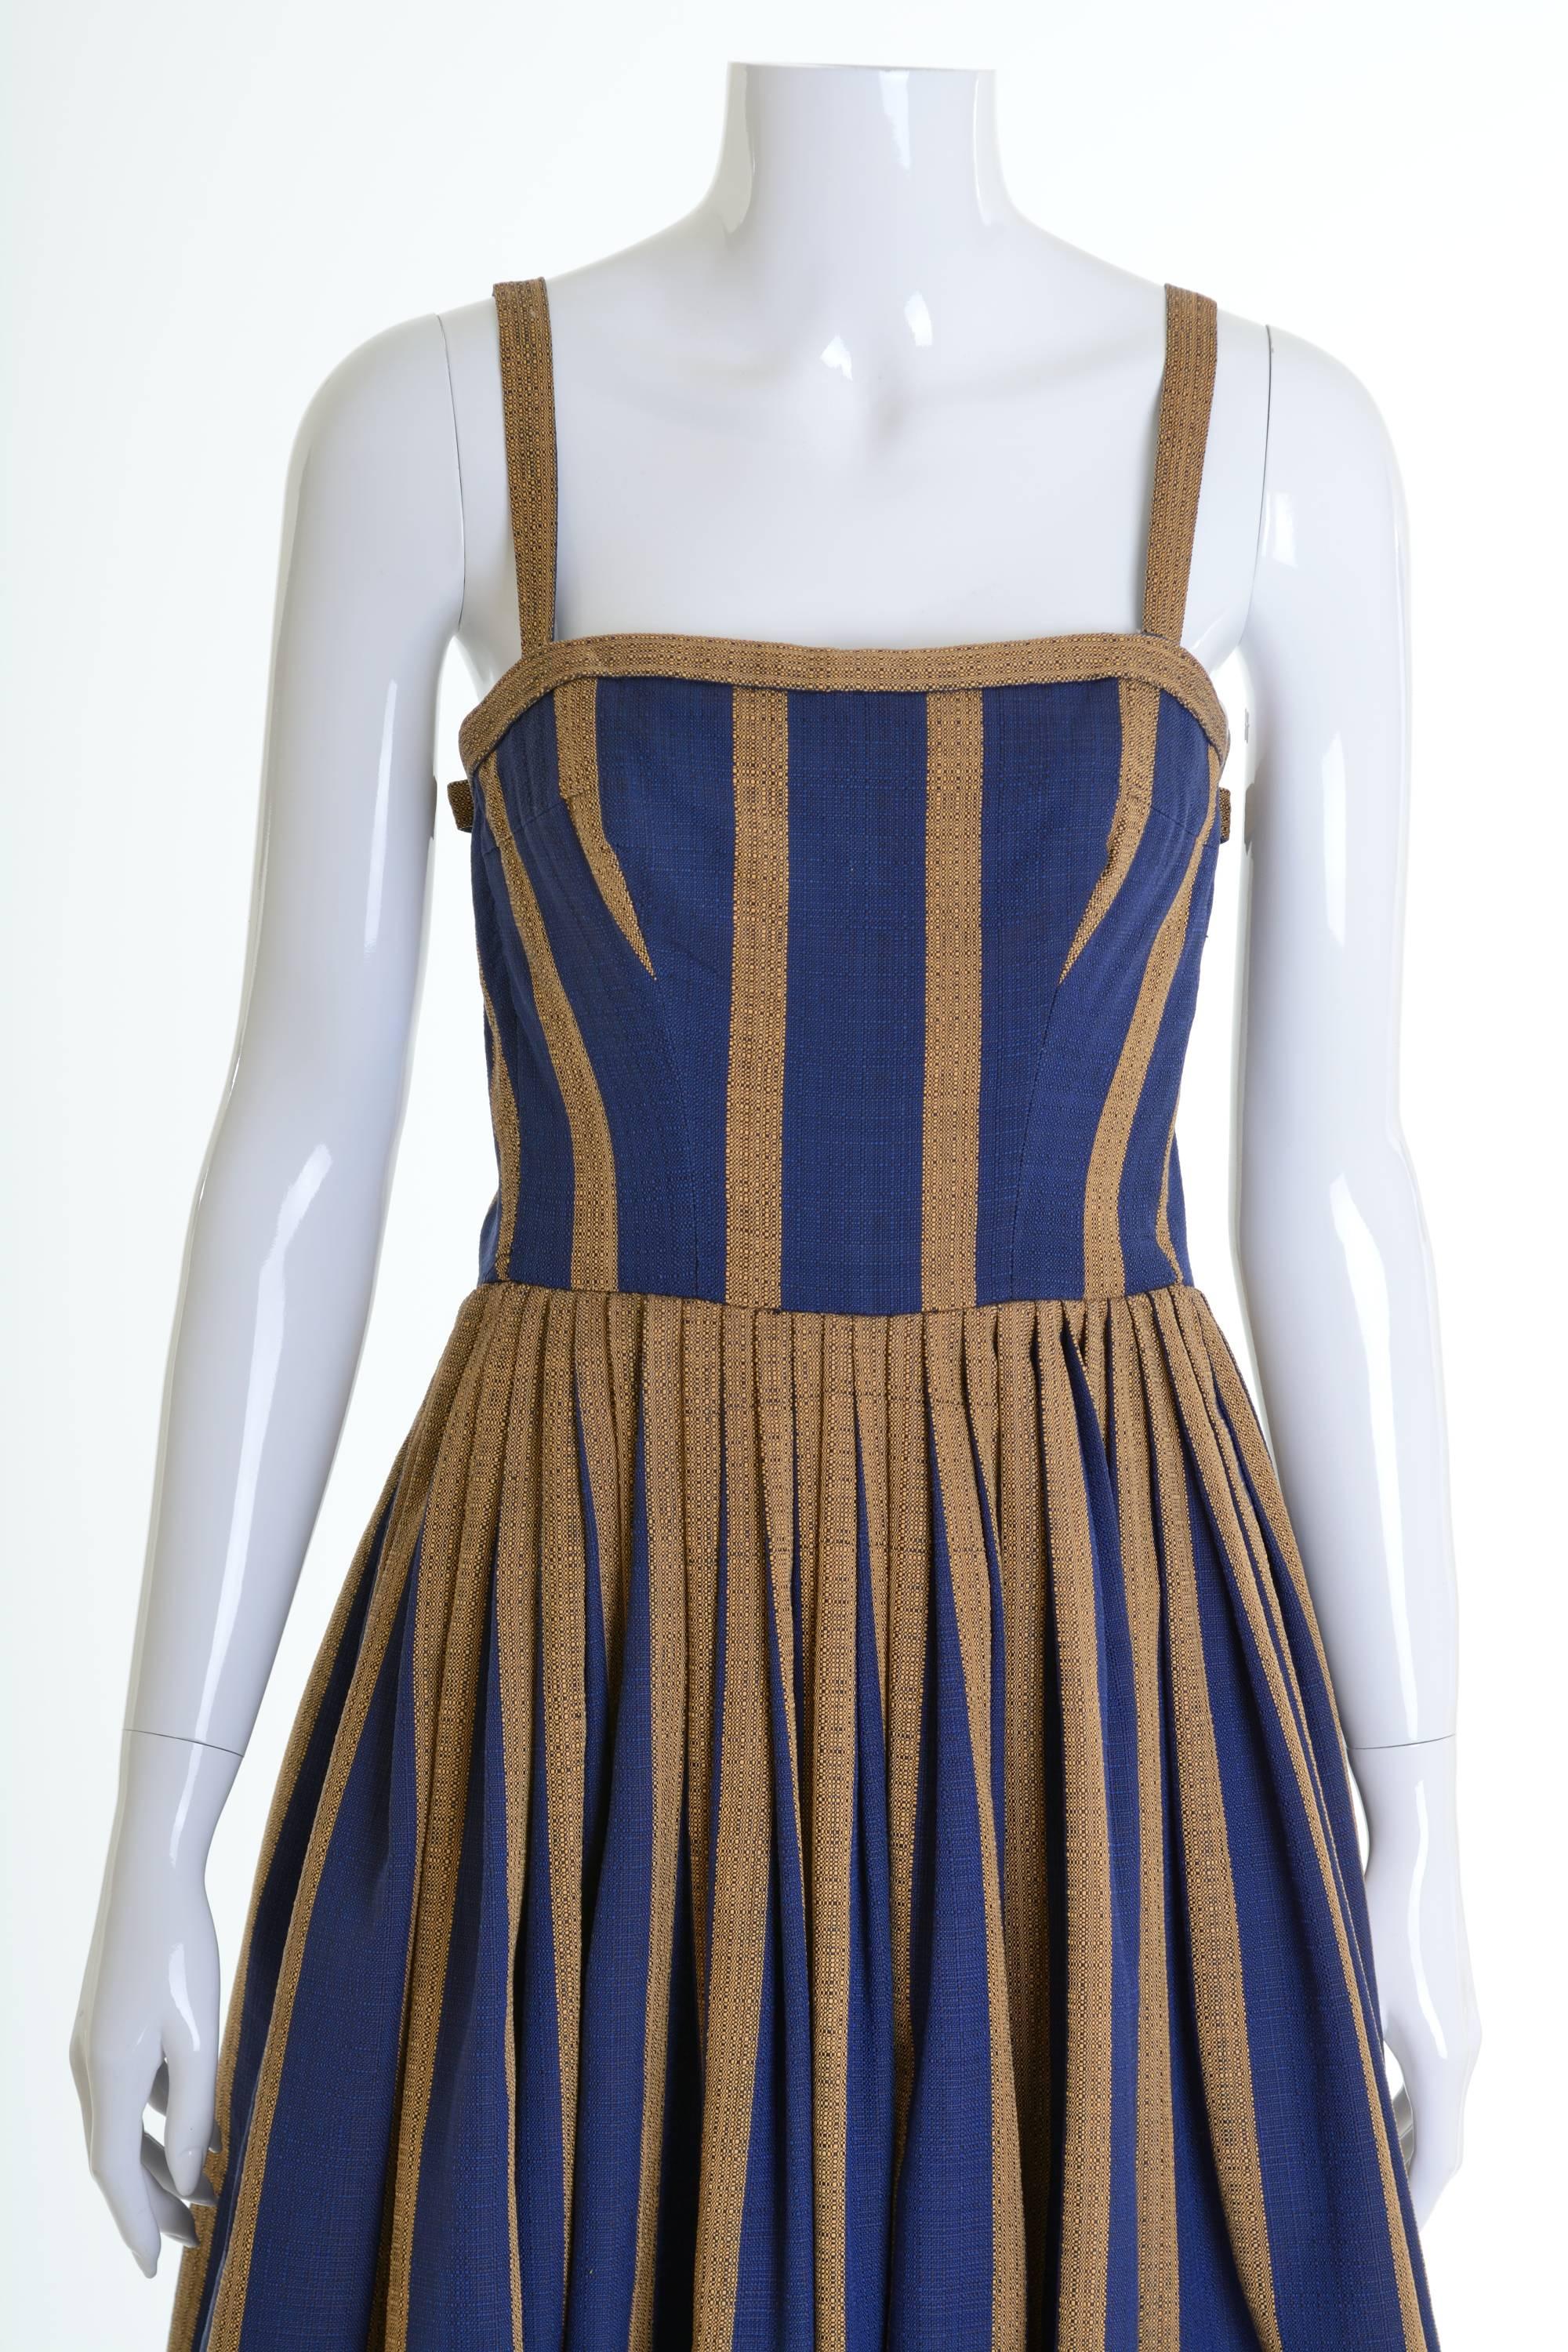 This 1950s spaghetti strap dress has a bustier in the inside and a circle pleated skirt.
The skirt is fully lined and has bows. The zip closure is behind and it has also covered eyelets & washers and hook & eye closures in some parts of the